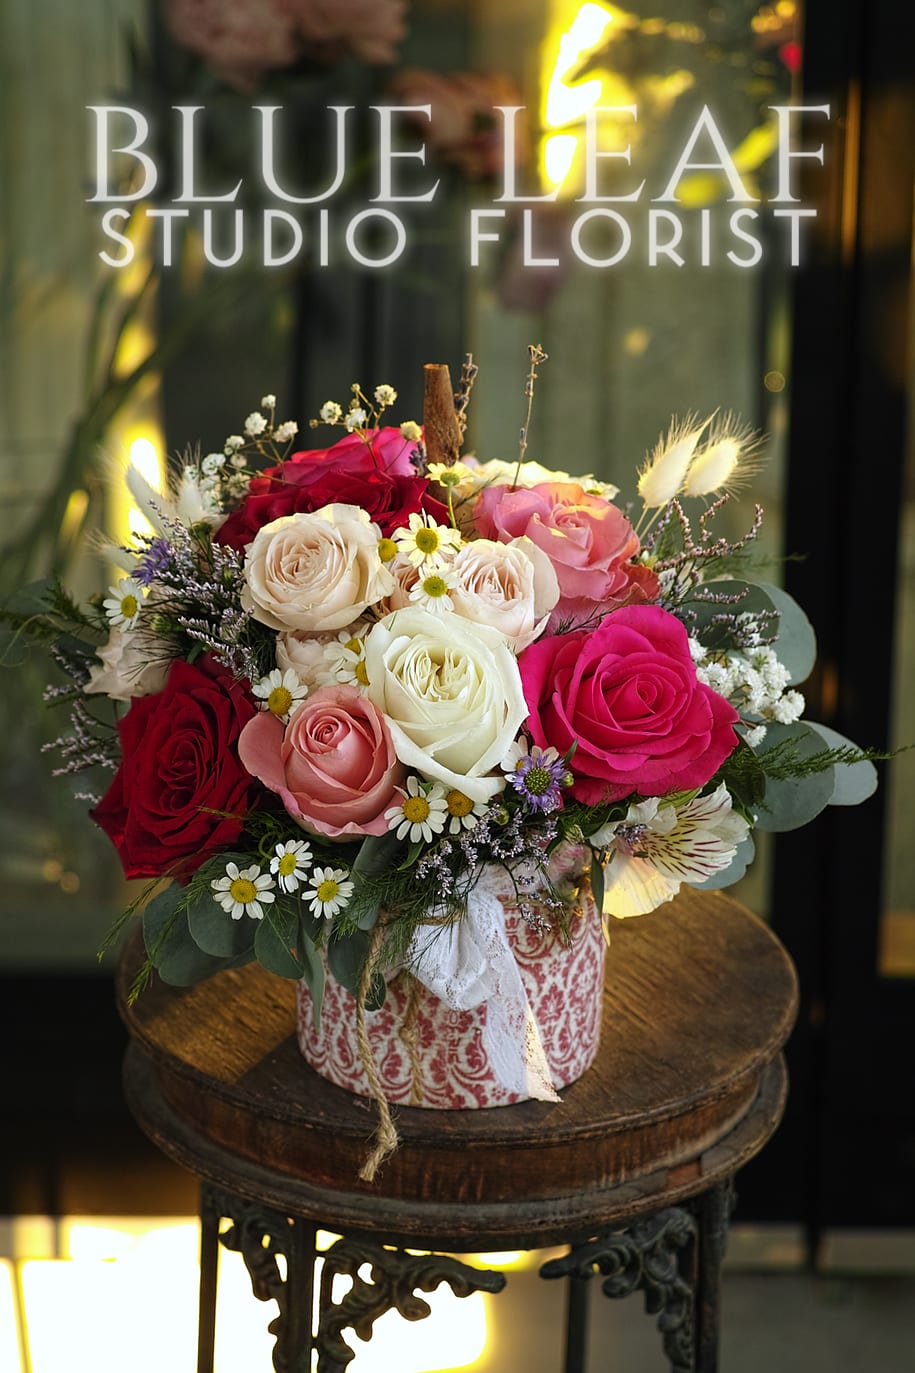 Rustic Love - A gorgeous arrangement of roses in shades of red, pink and white, styled in a low ceramic vase. Includes touches of chamomile, limonium, and babies breath. 